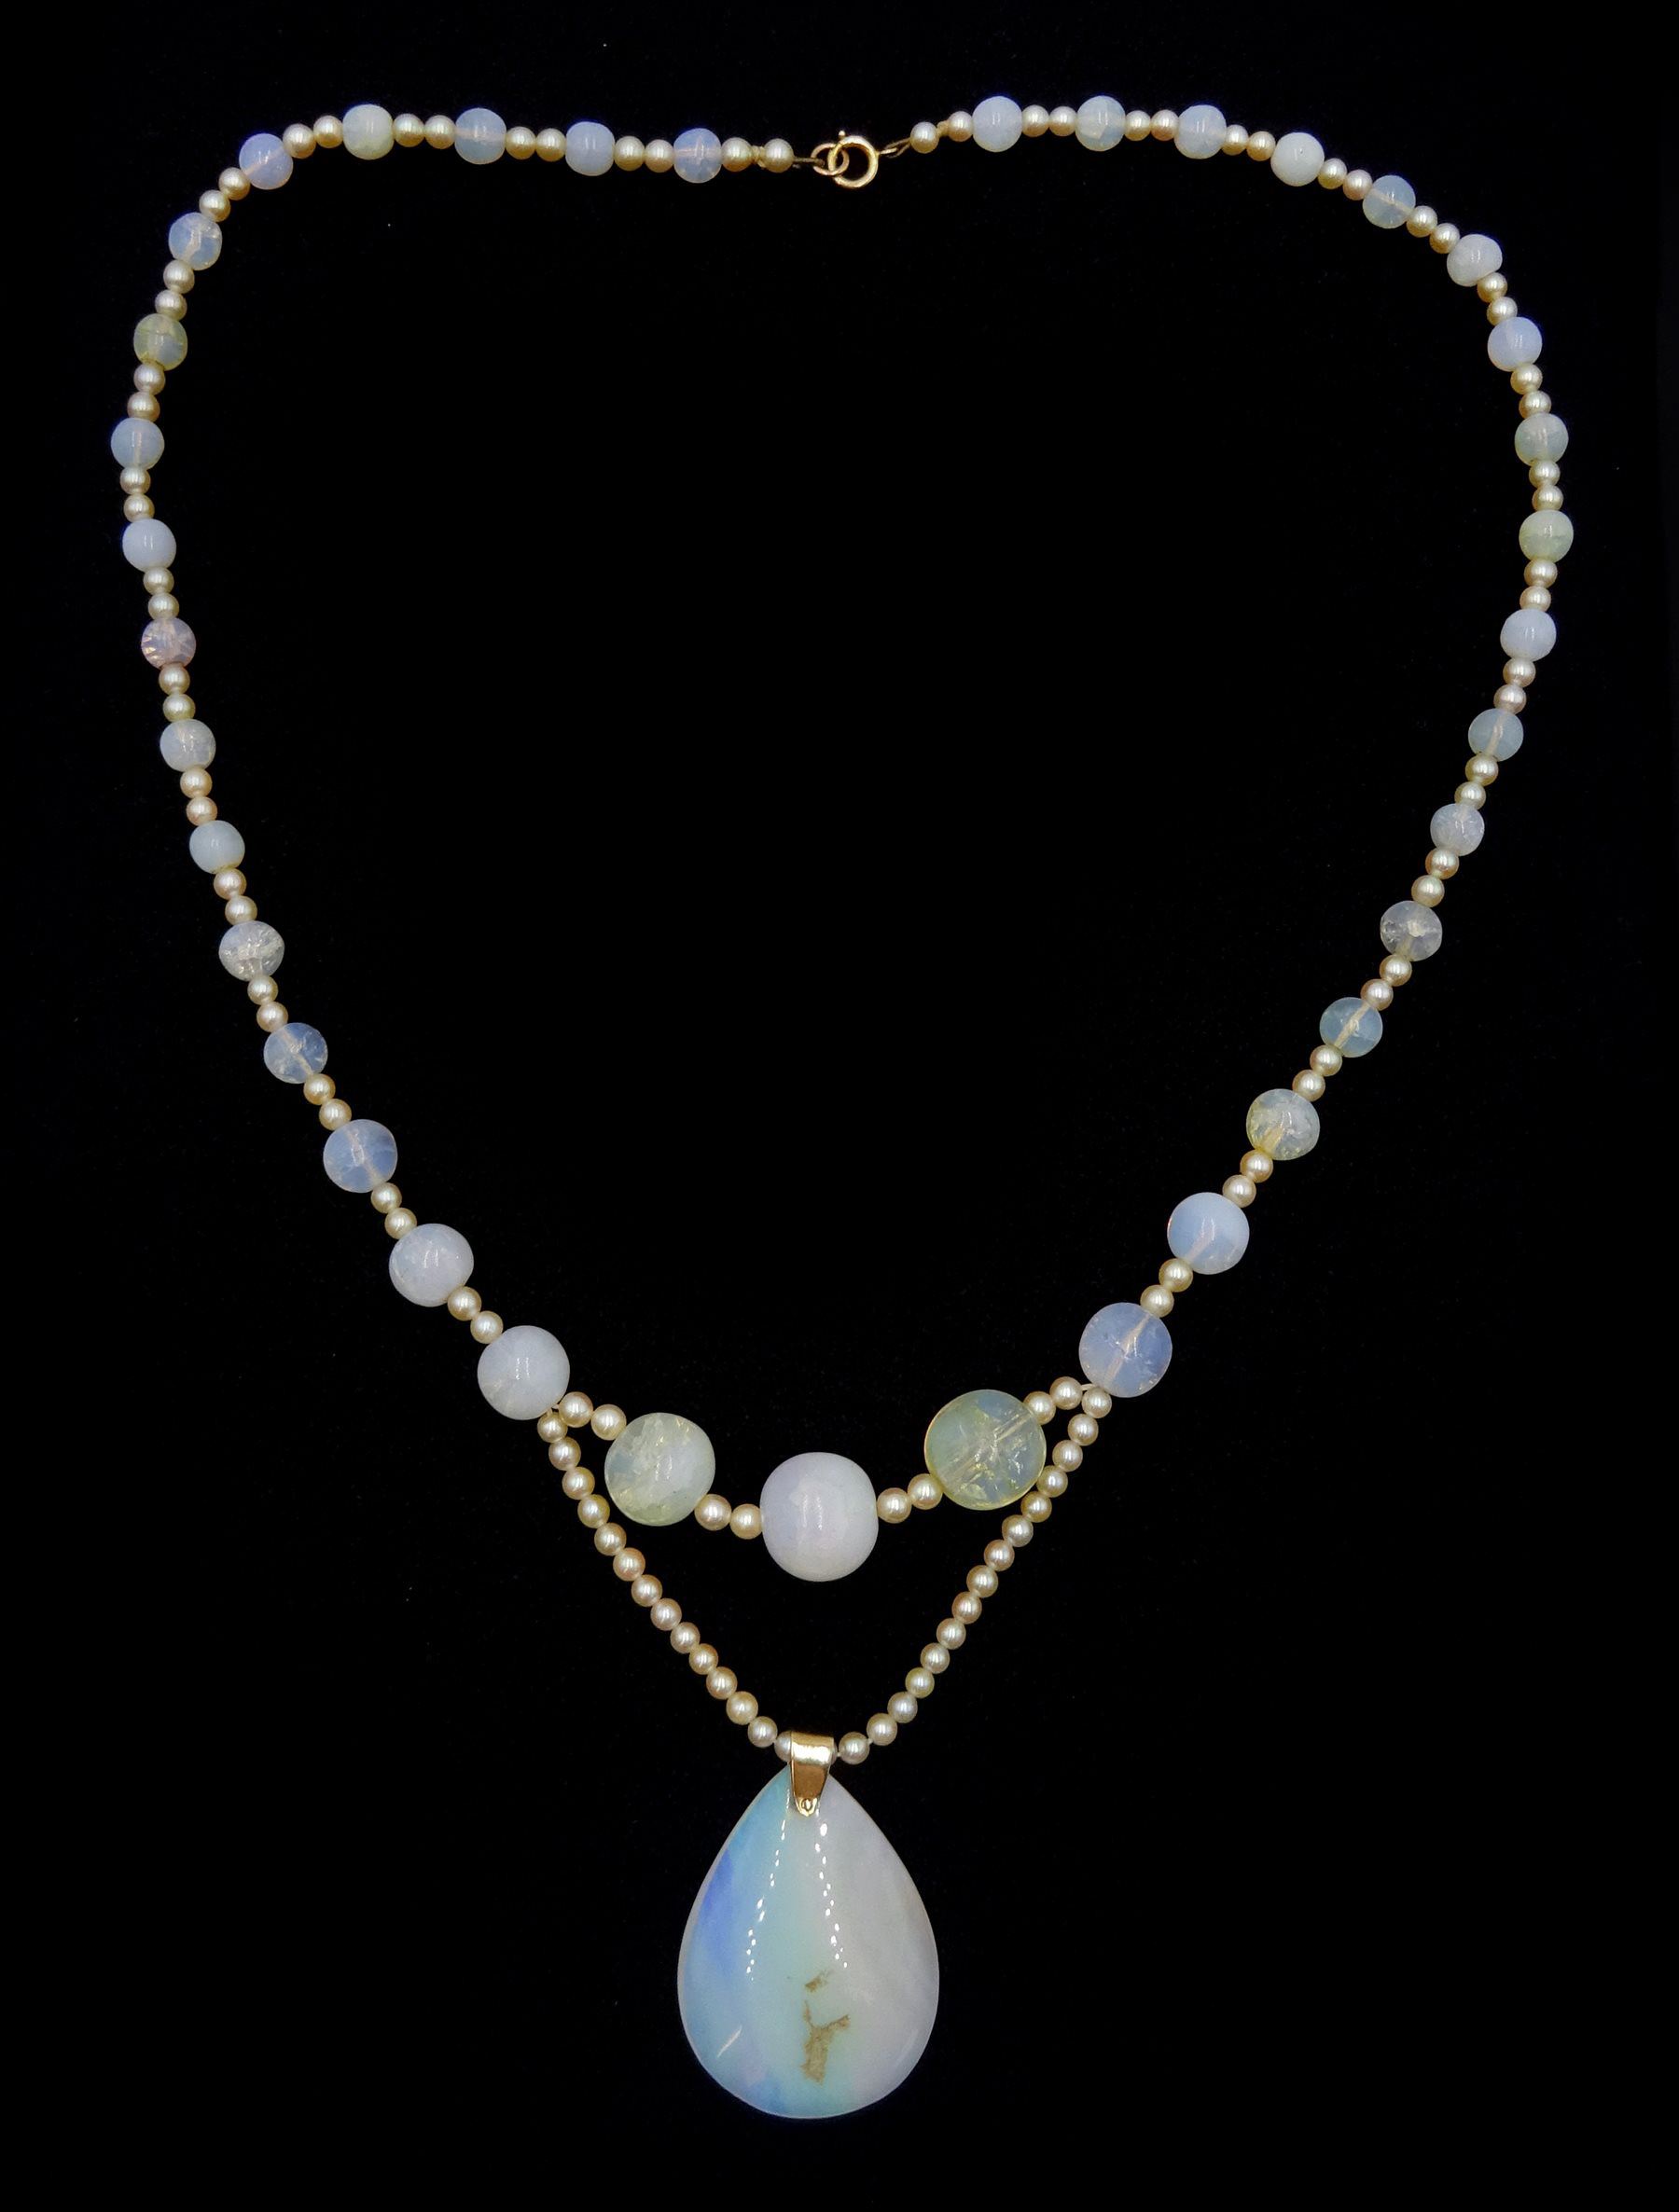 Early-mid 20th century opal